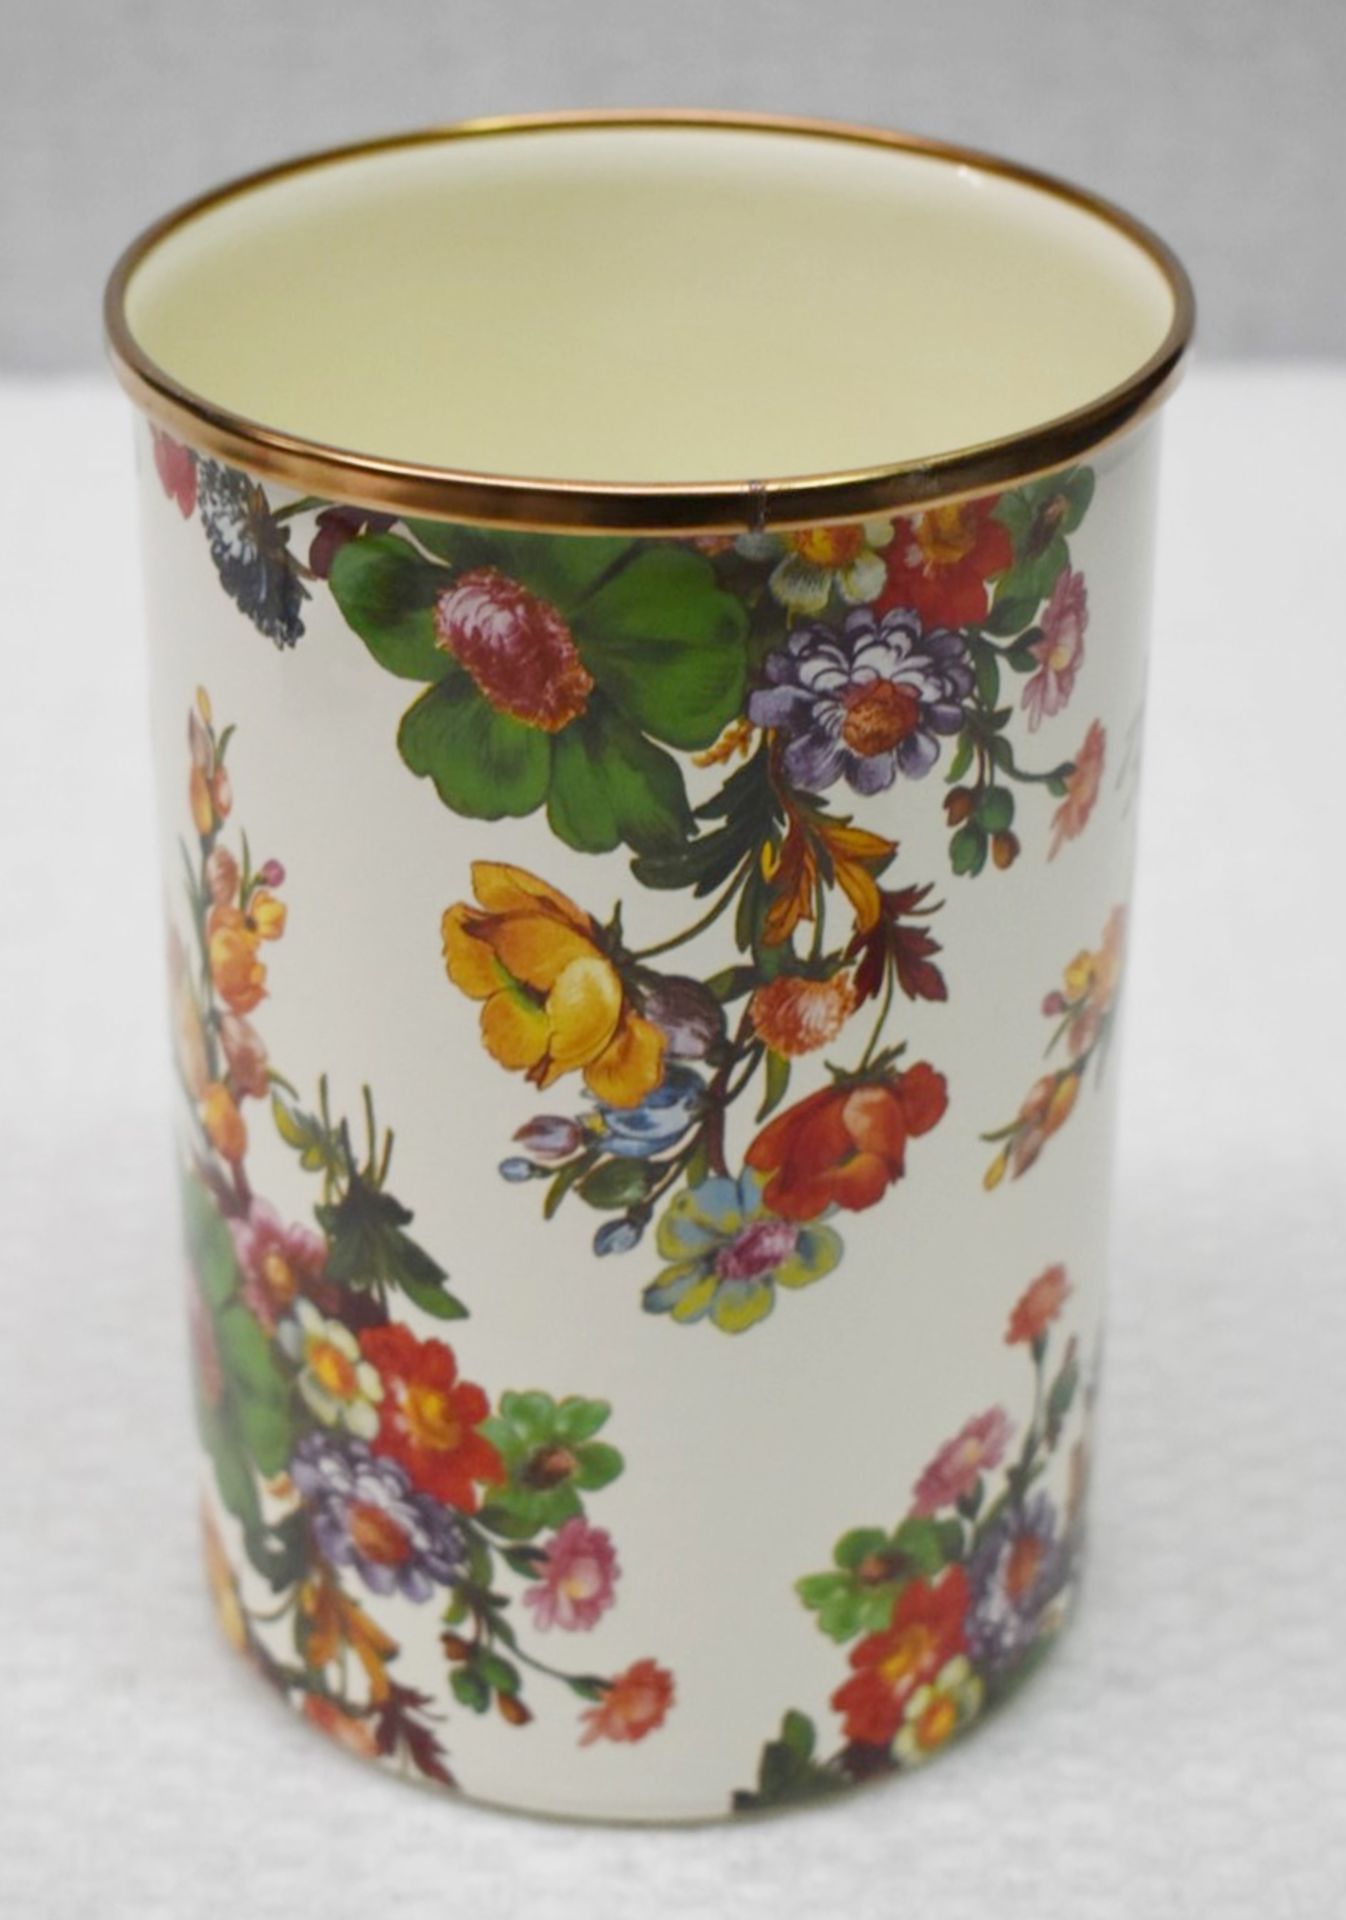 1 x MACKENZIE CHILDS Large Parchment Check Enamel Canister - Original Price £116.00 - Ref: 2091737/ - Image 3 of 4